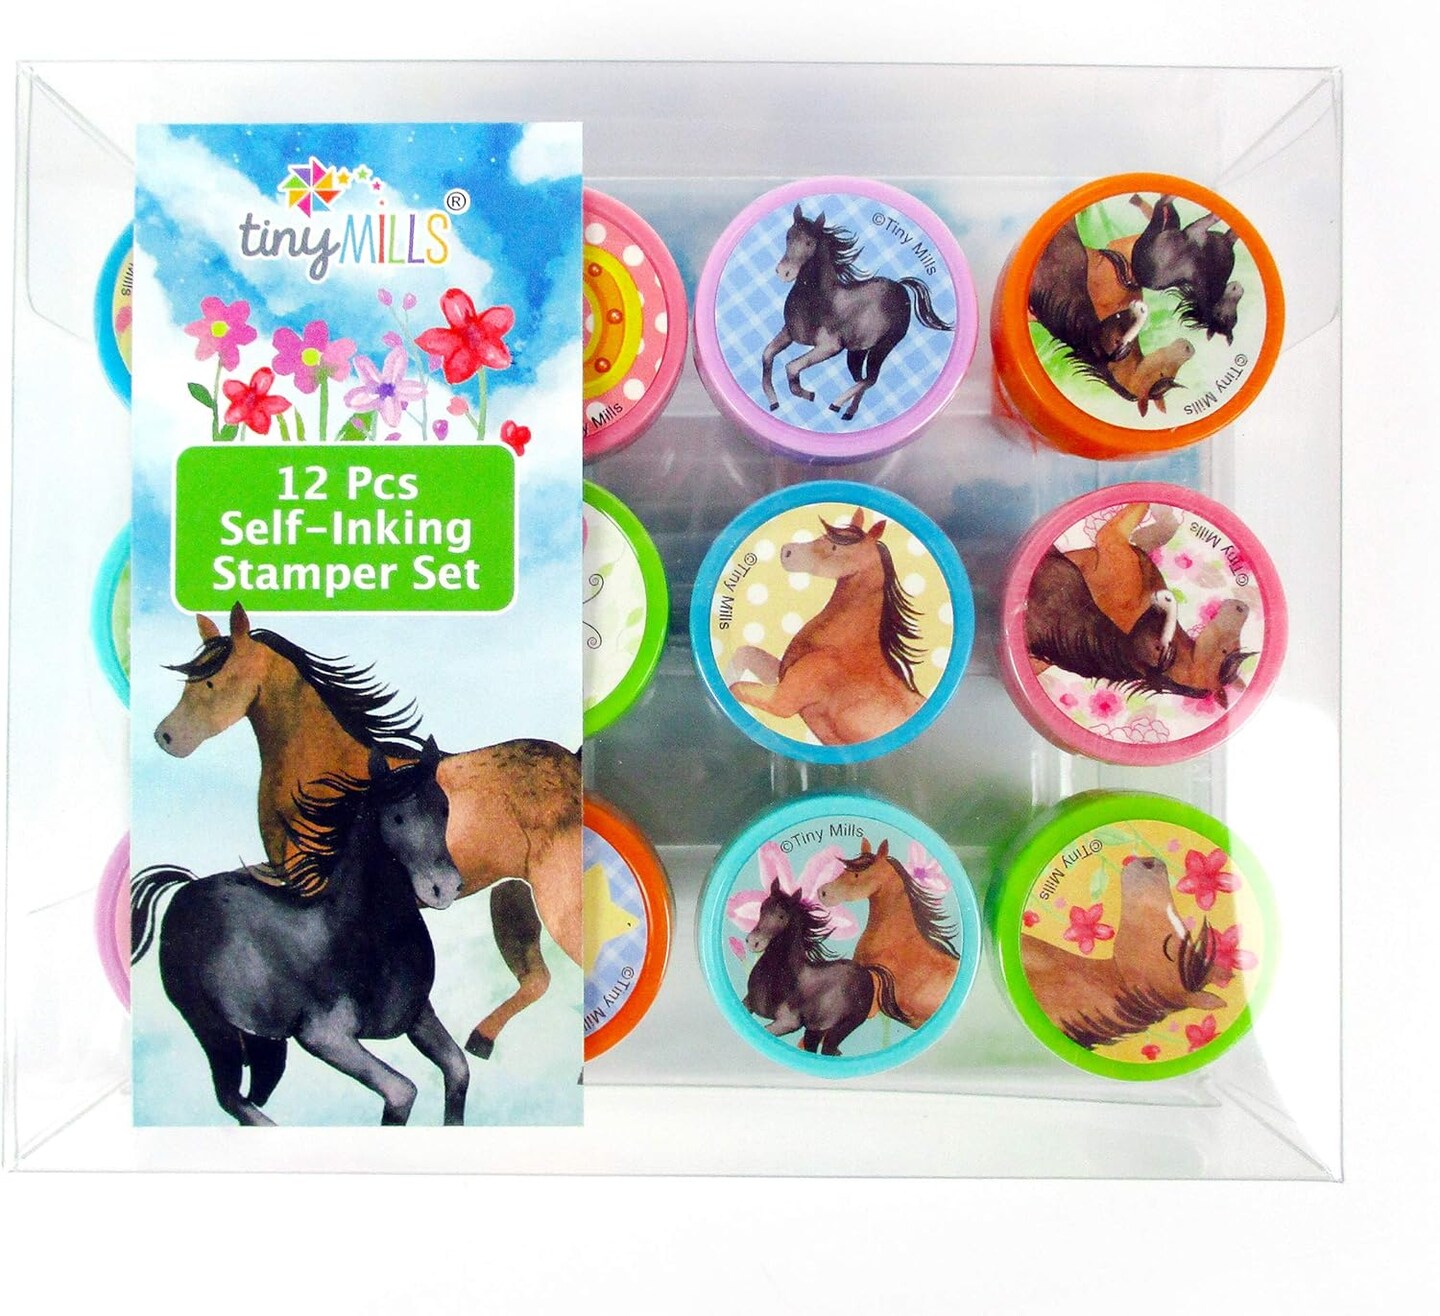 TINYMILLS 12 Pcs Horse Pony Western Stamp Kit for Kids Self Inking Stamps Gift